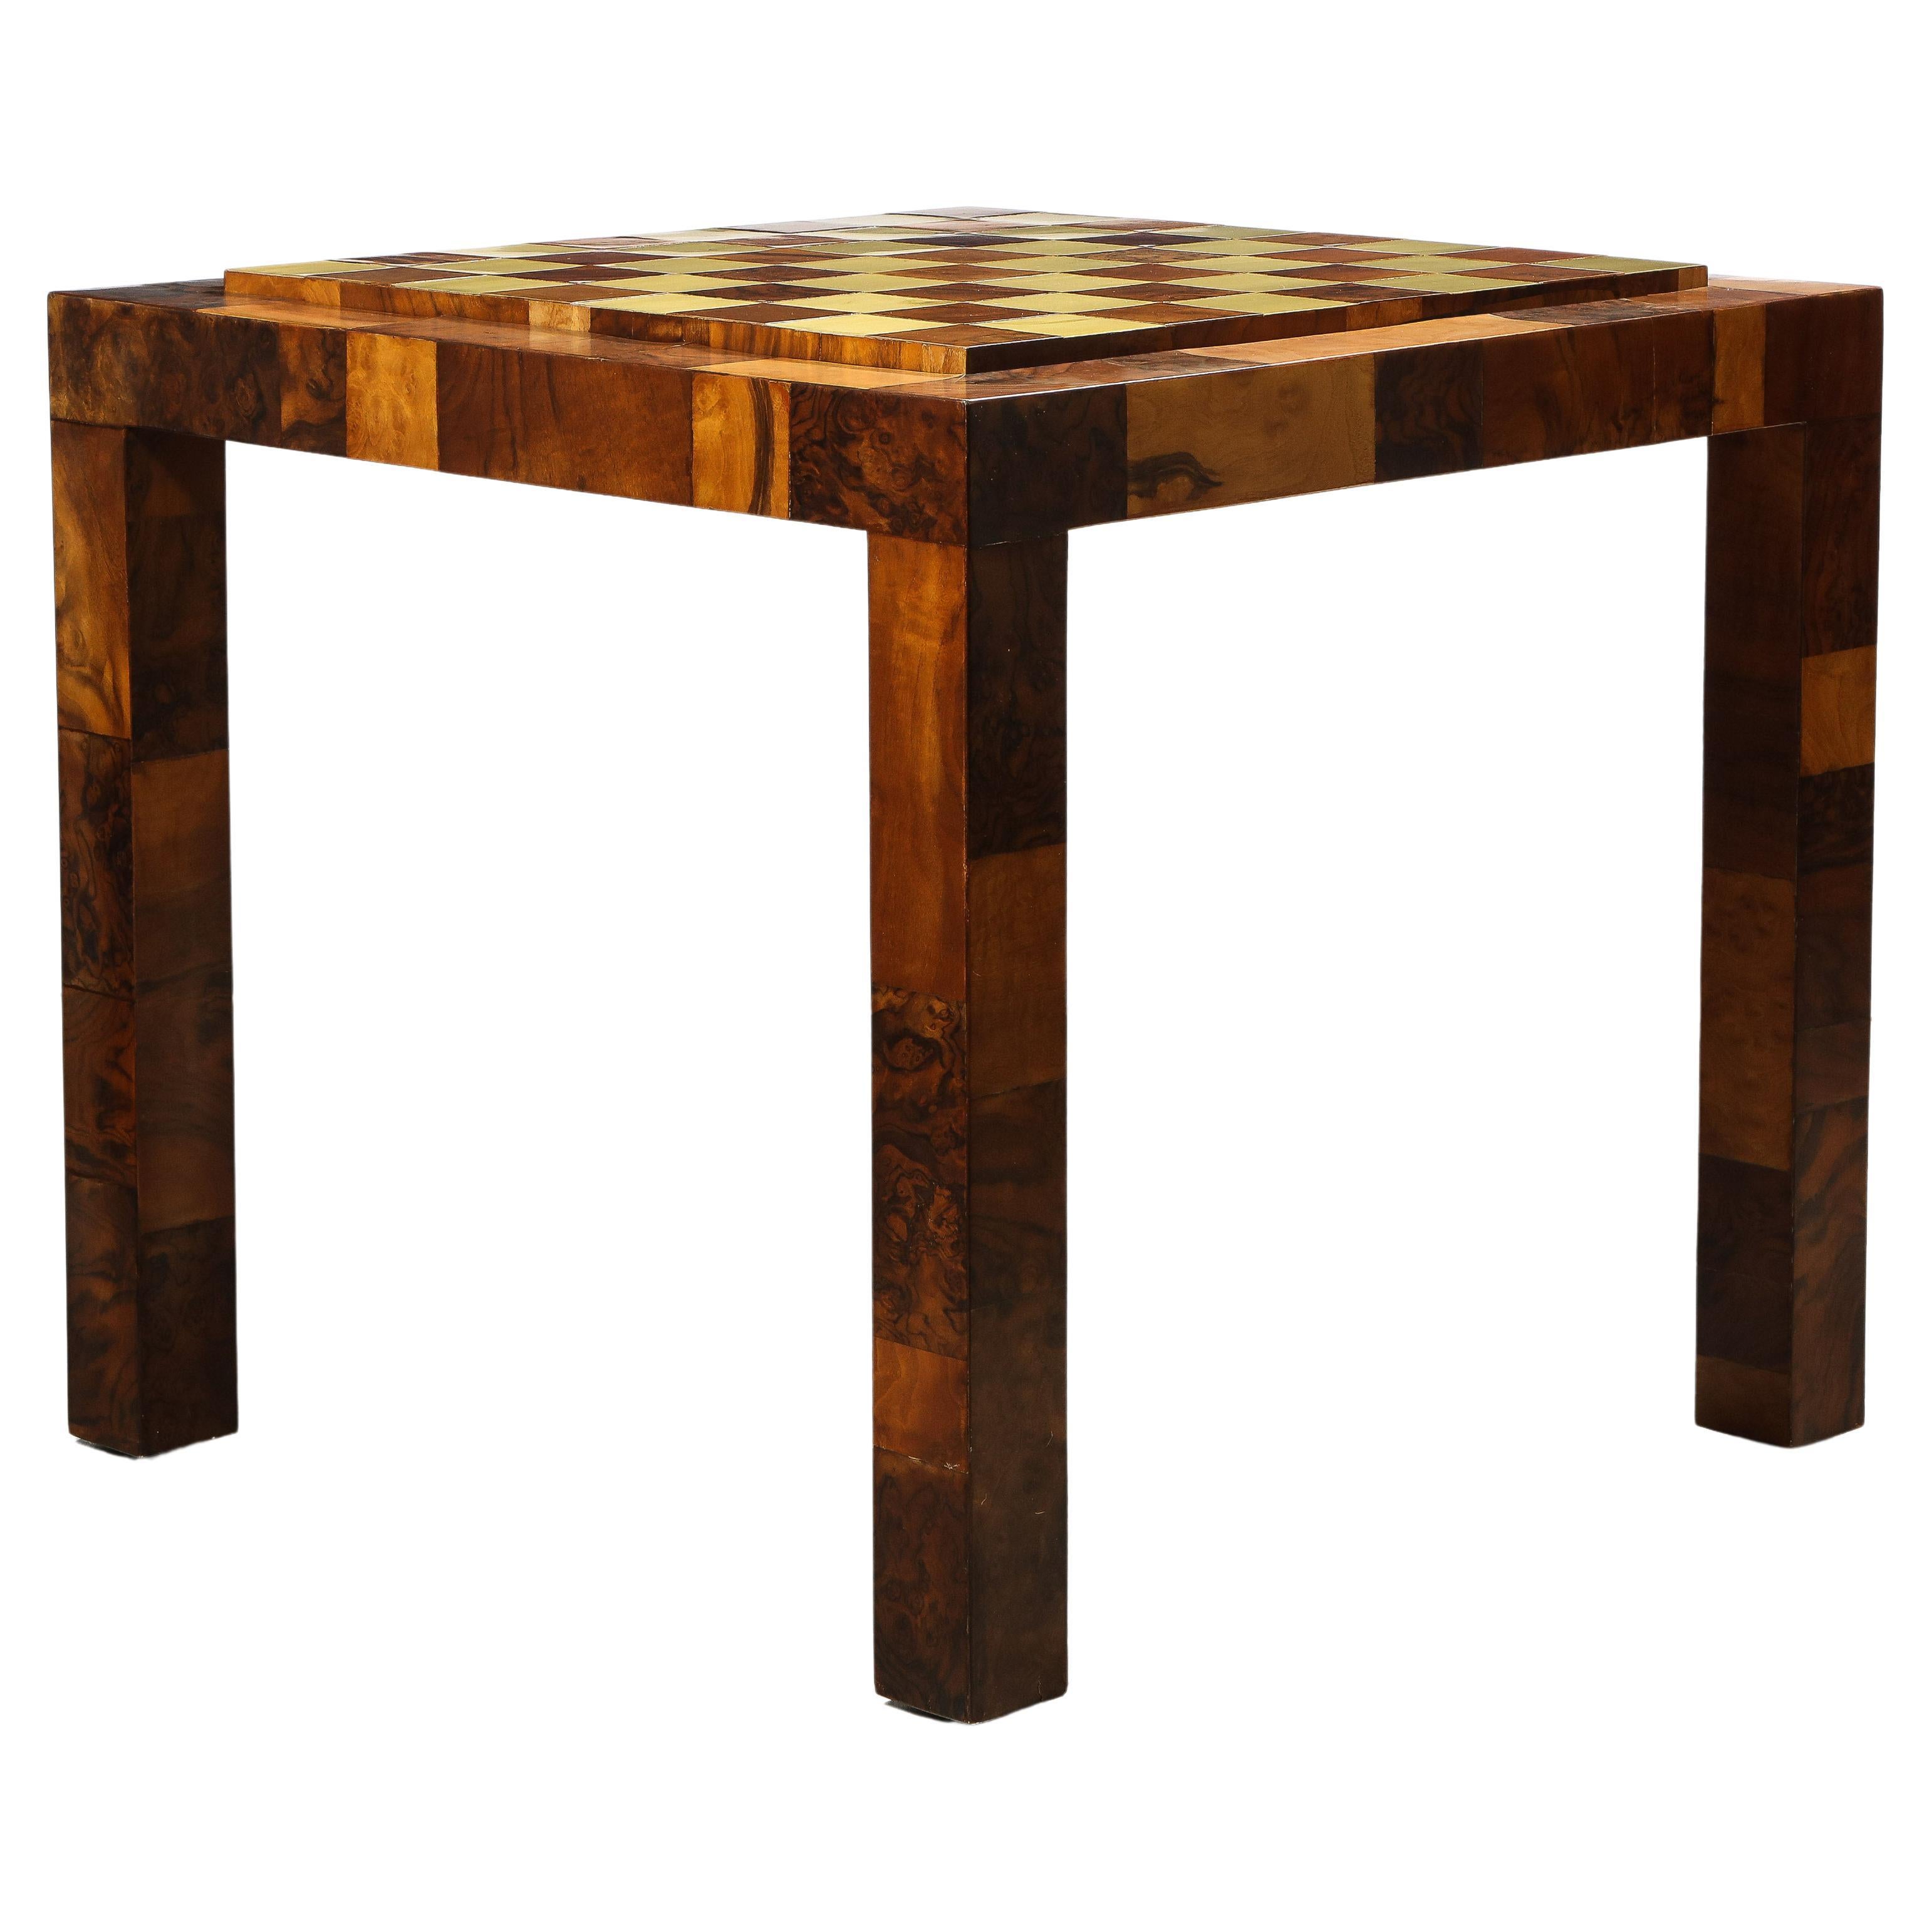 Patchwork Burl and Polished Brass Game Table by Paul Evans